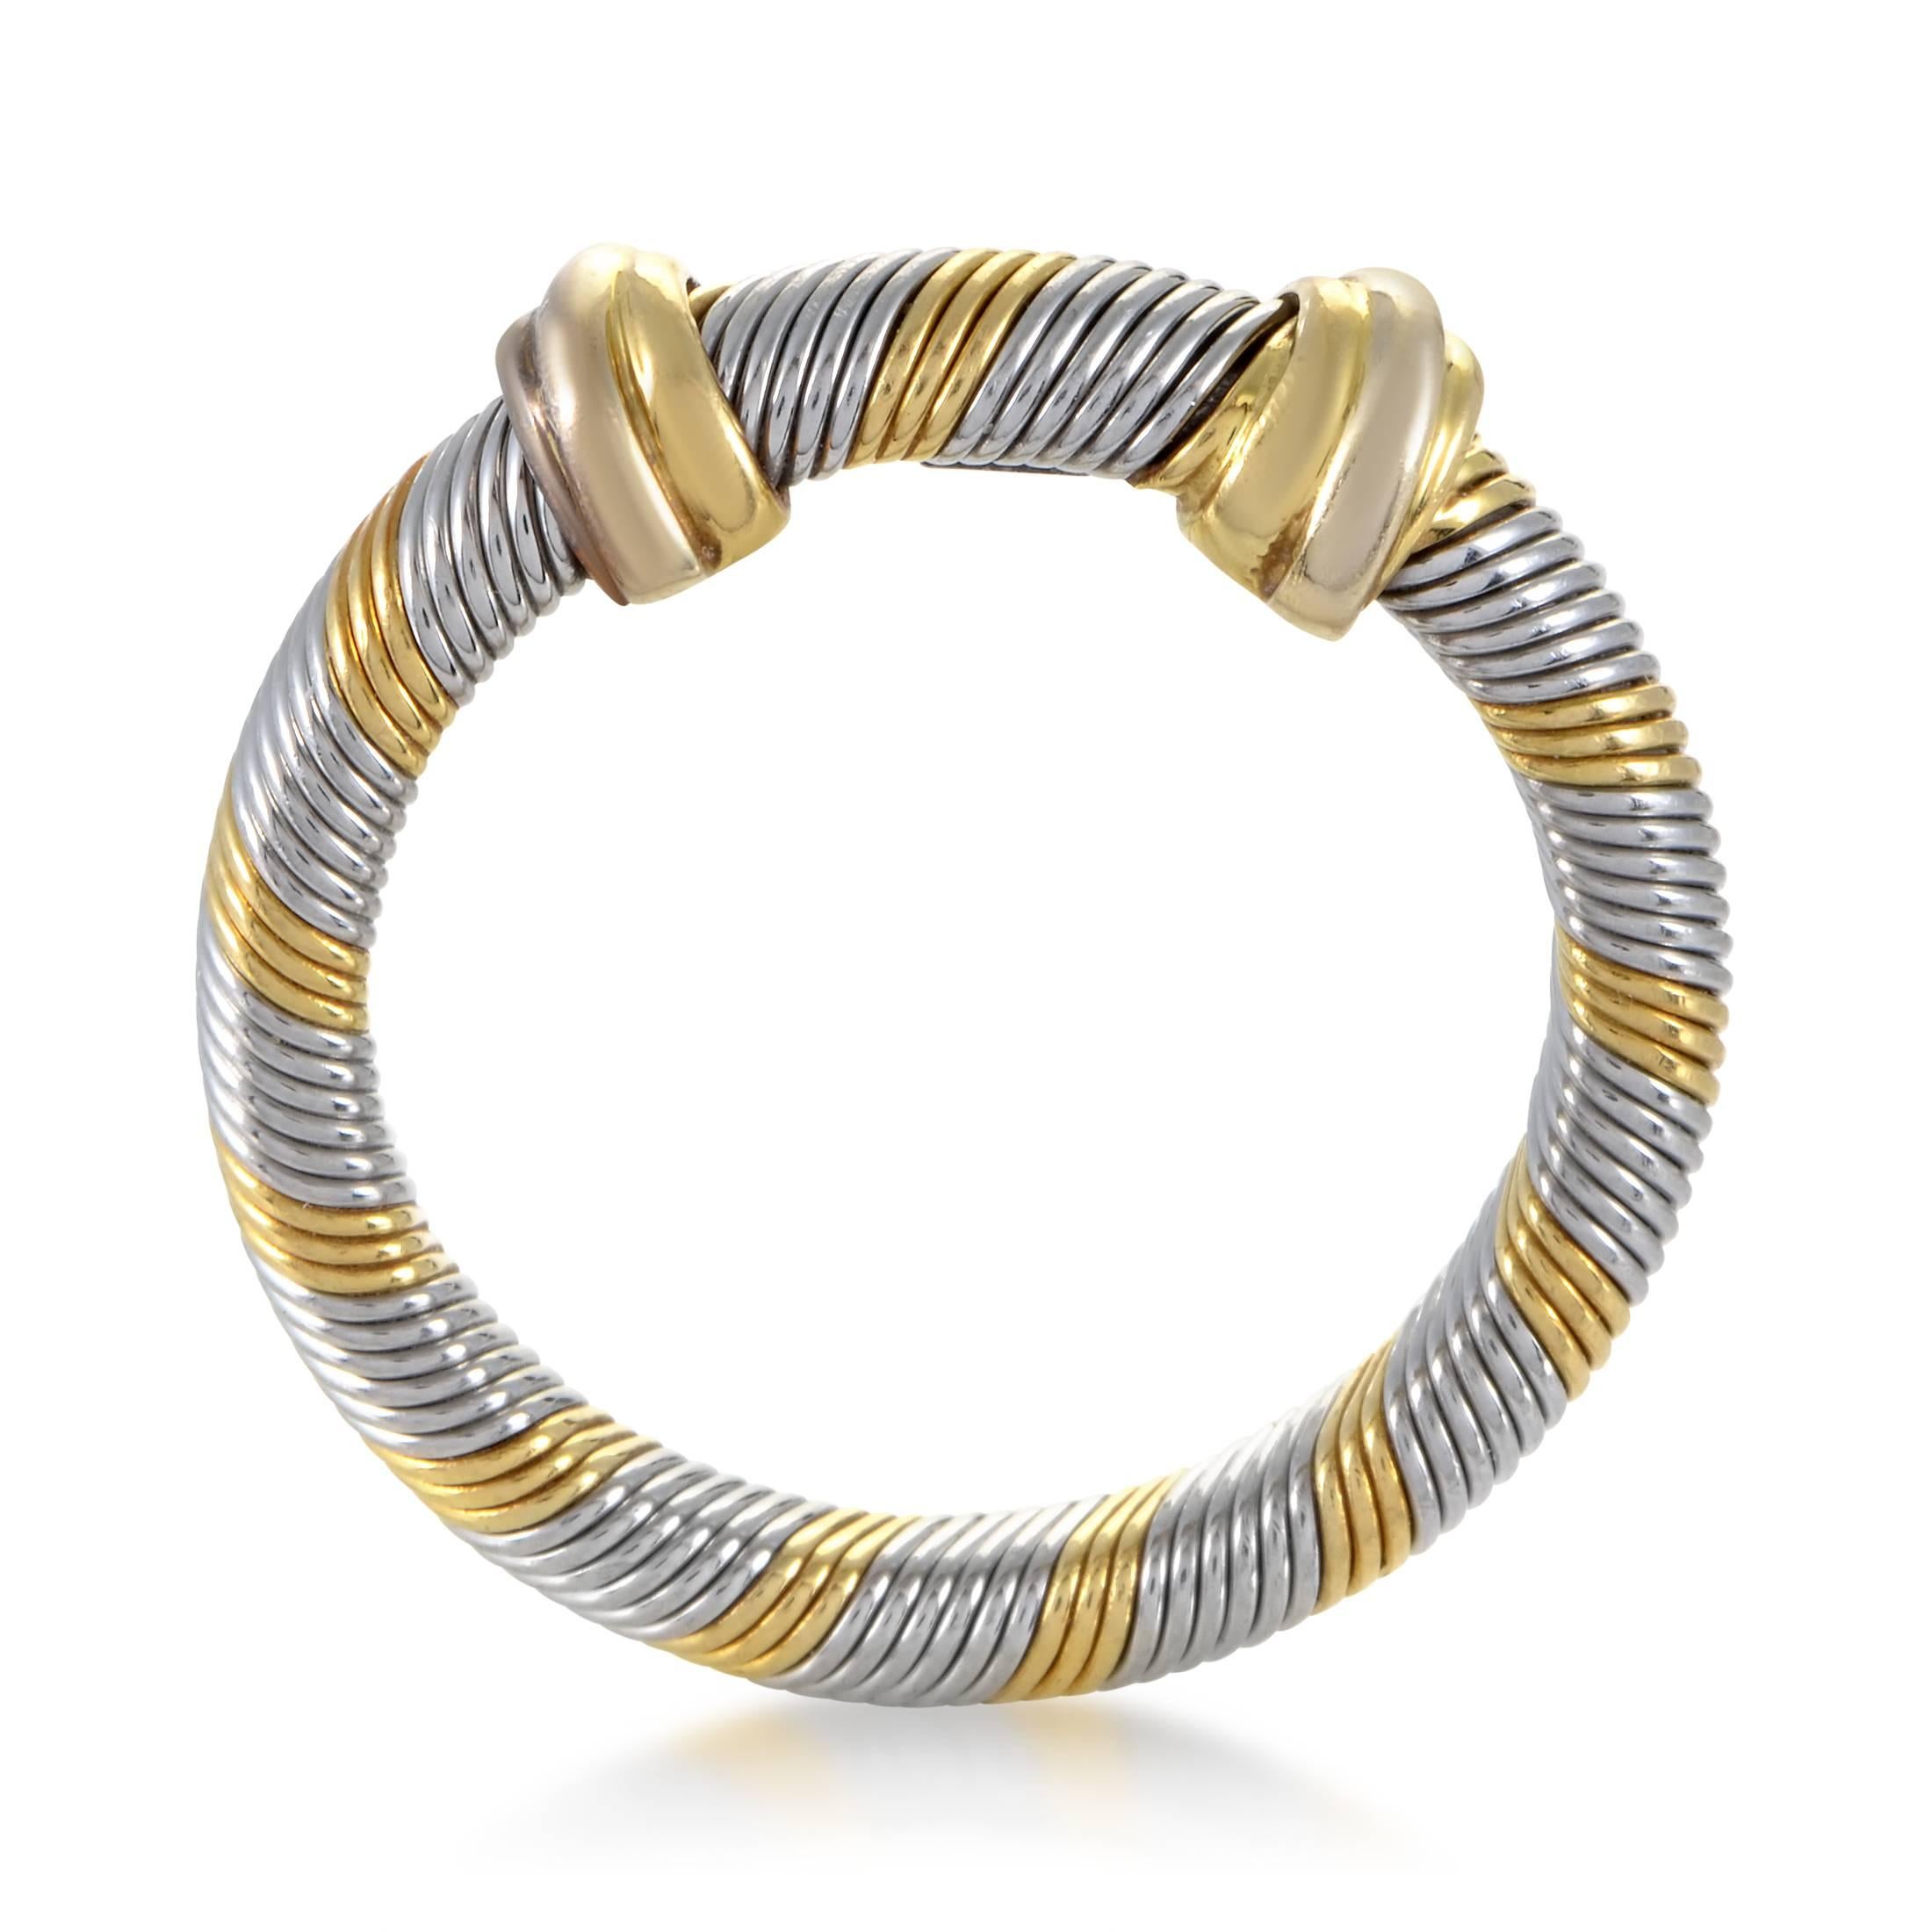 The magnificent coiled texture produces scintillating allure and fascinating play of light upon the impeccably polished surface of both the prestigious 18K yellow gold and shimmering stainless steel in this sublime ring from Cartier.
Ring Size: